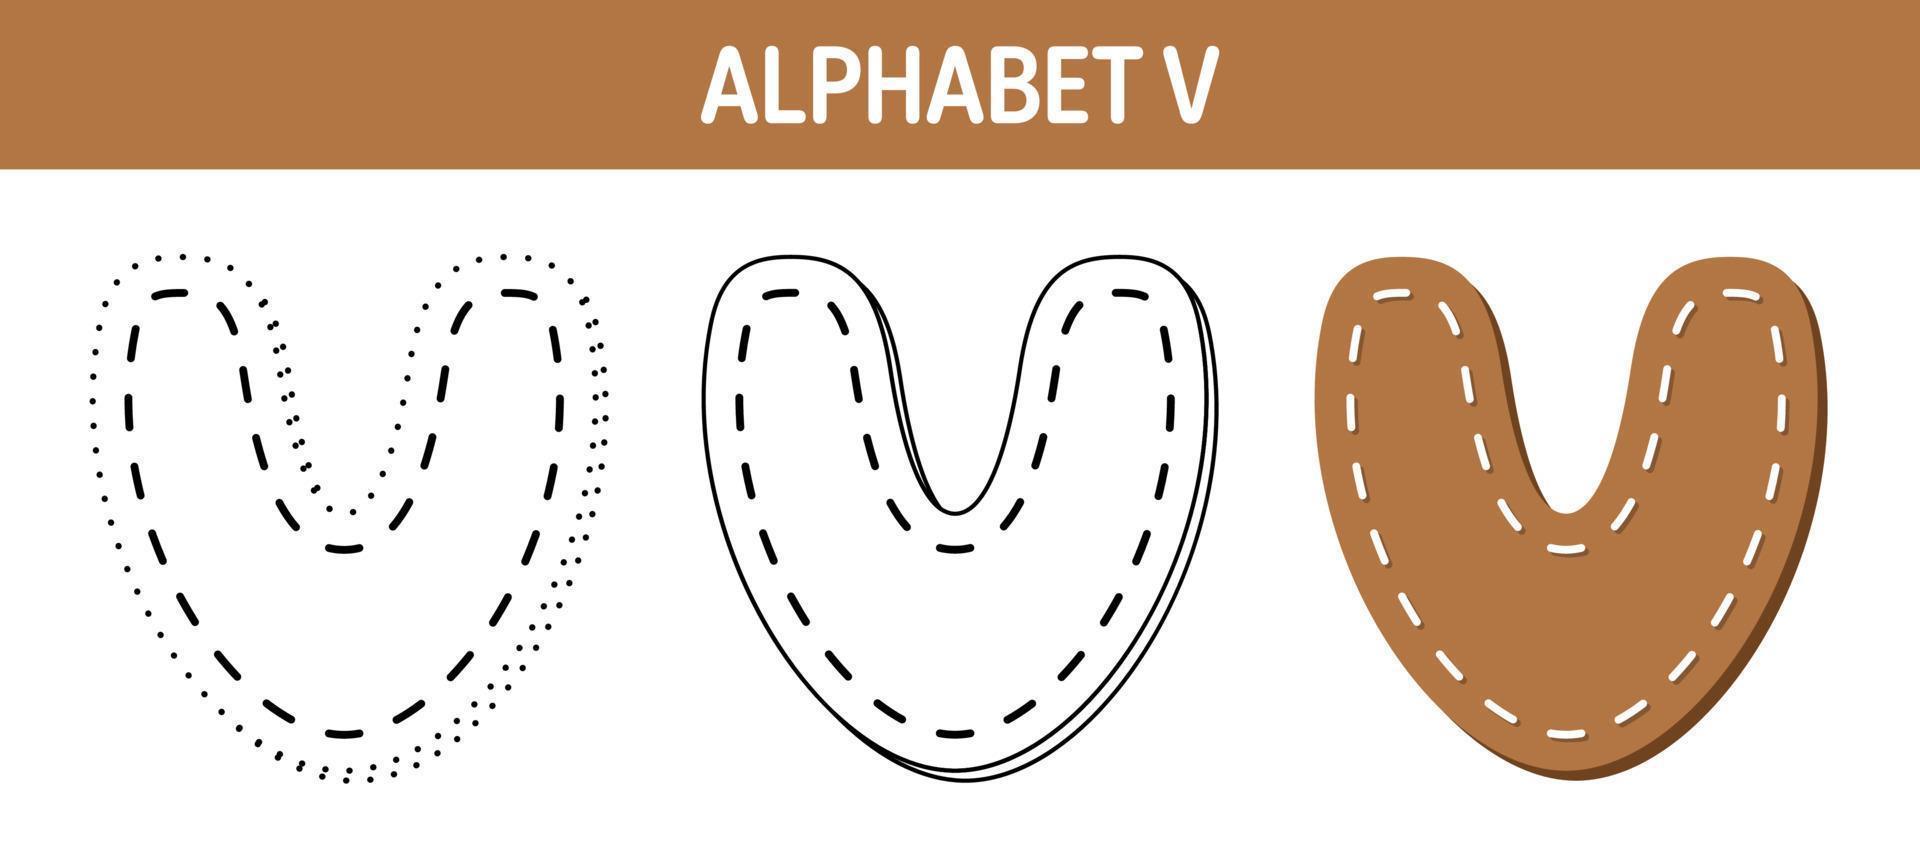 Alphabet V tracing and coloring worksheet for kids vector